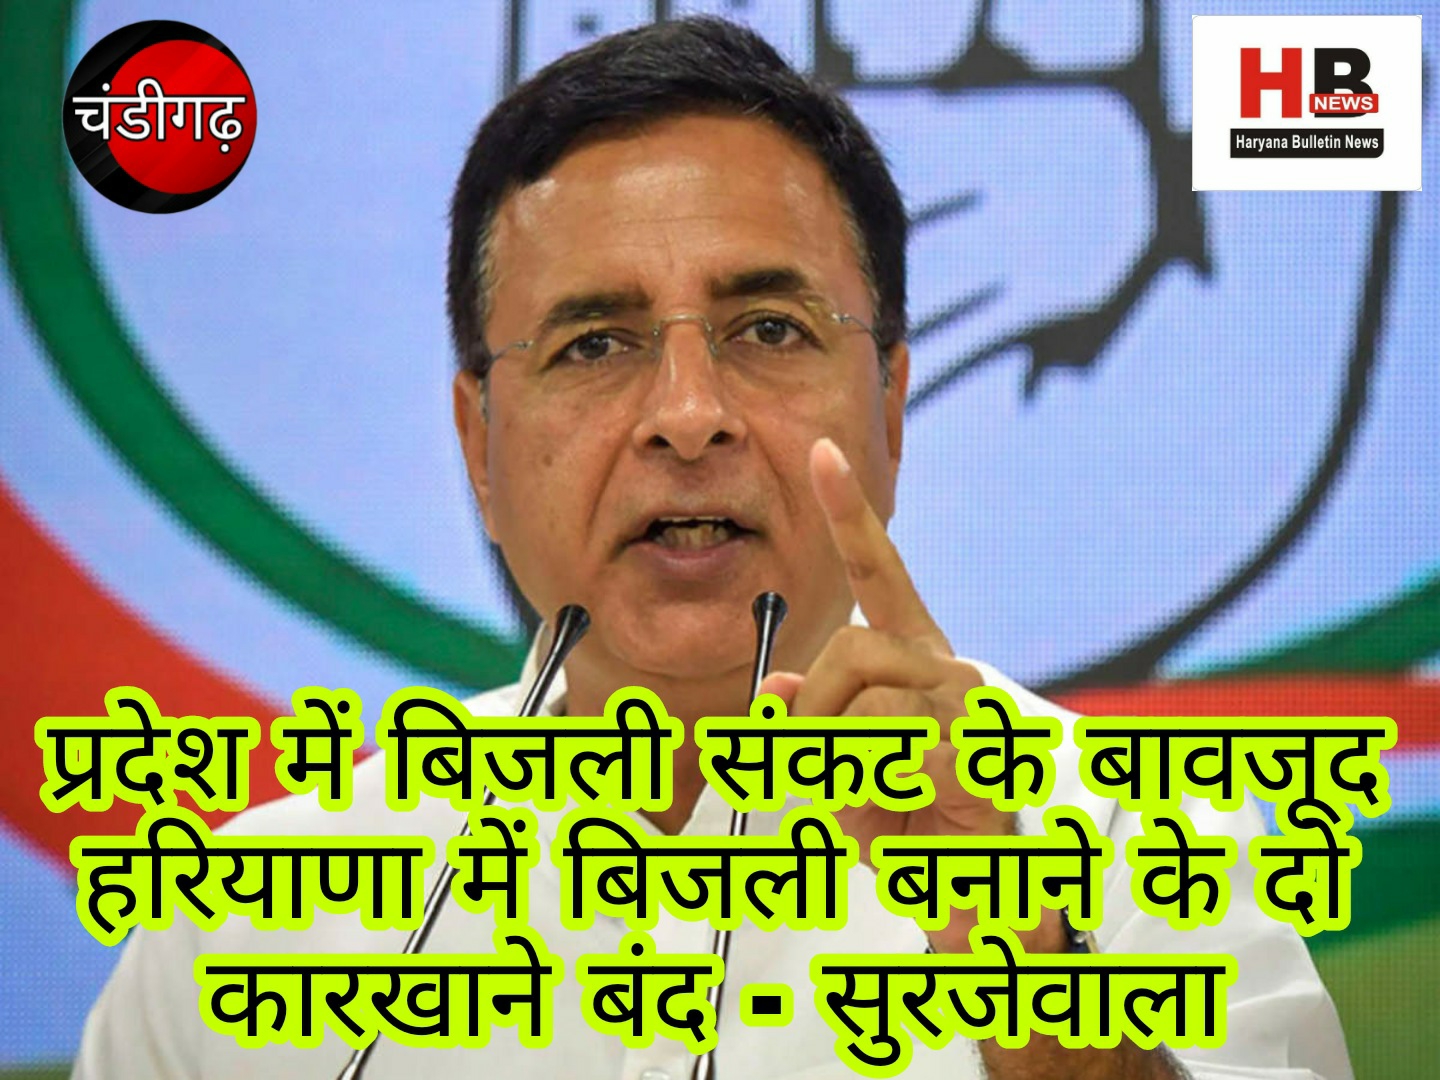 Despite the power crisis in the state, two factories for making electricity in Haryana closed - Surjewala